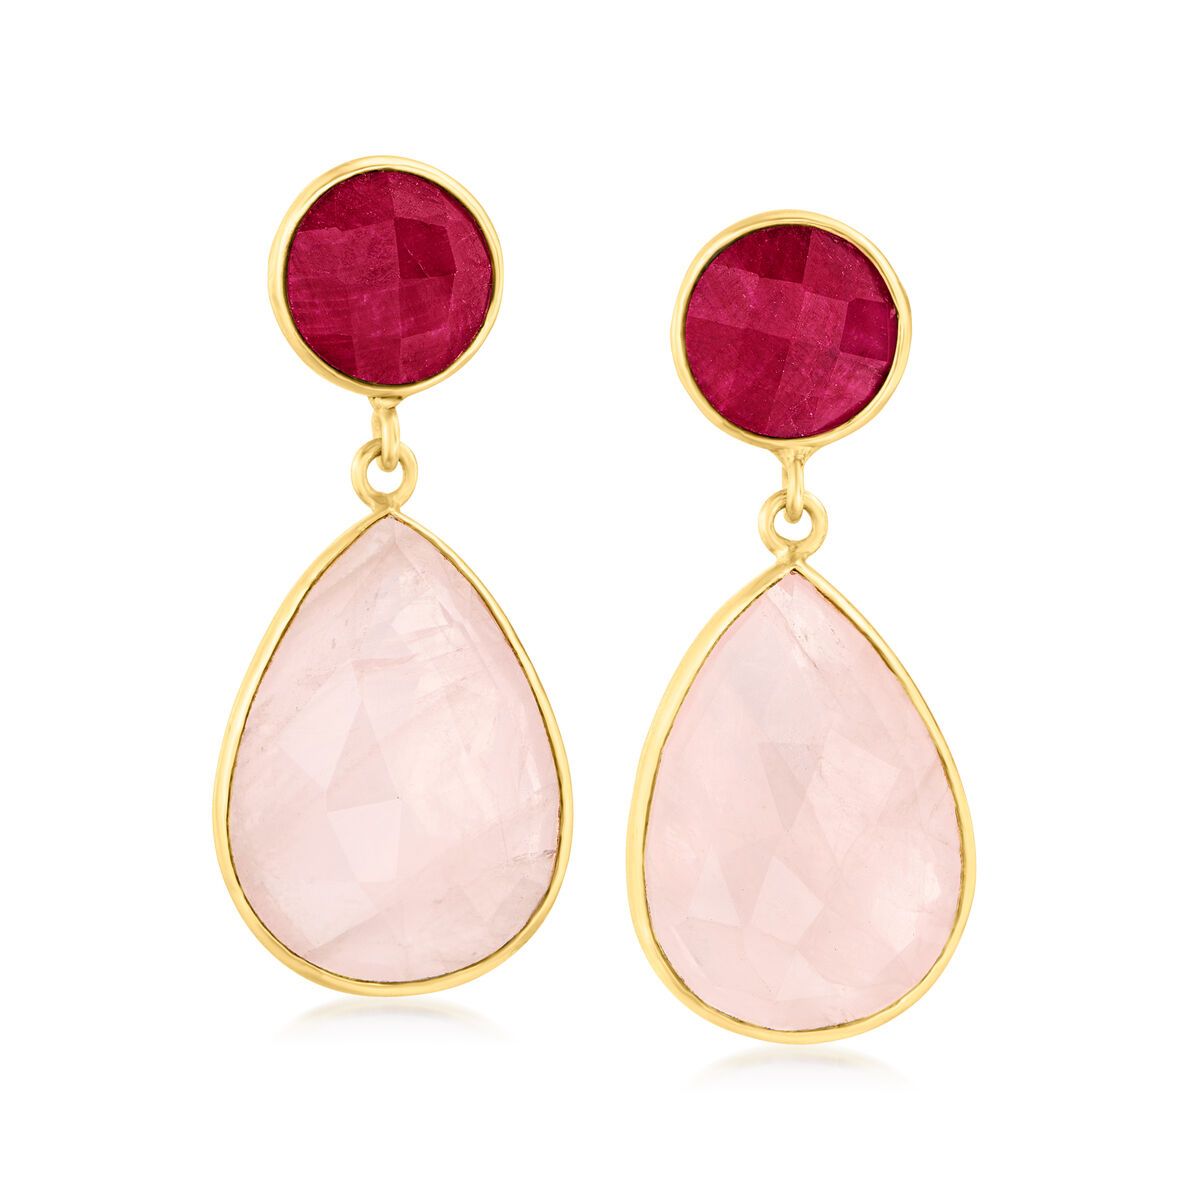 18.00 ct. t.w. Rose Quartz and 2.80 ct. t.w. Ruby Drop Earrings in 18kt Gold Over Sterling | Ross-Simons